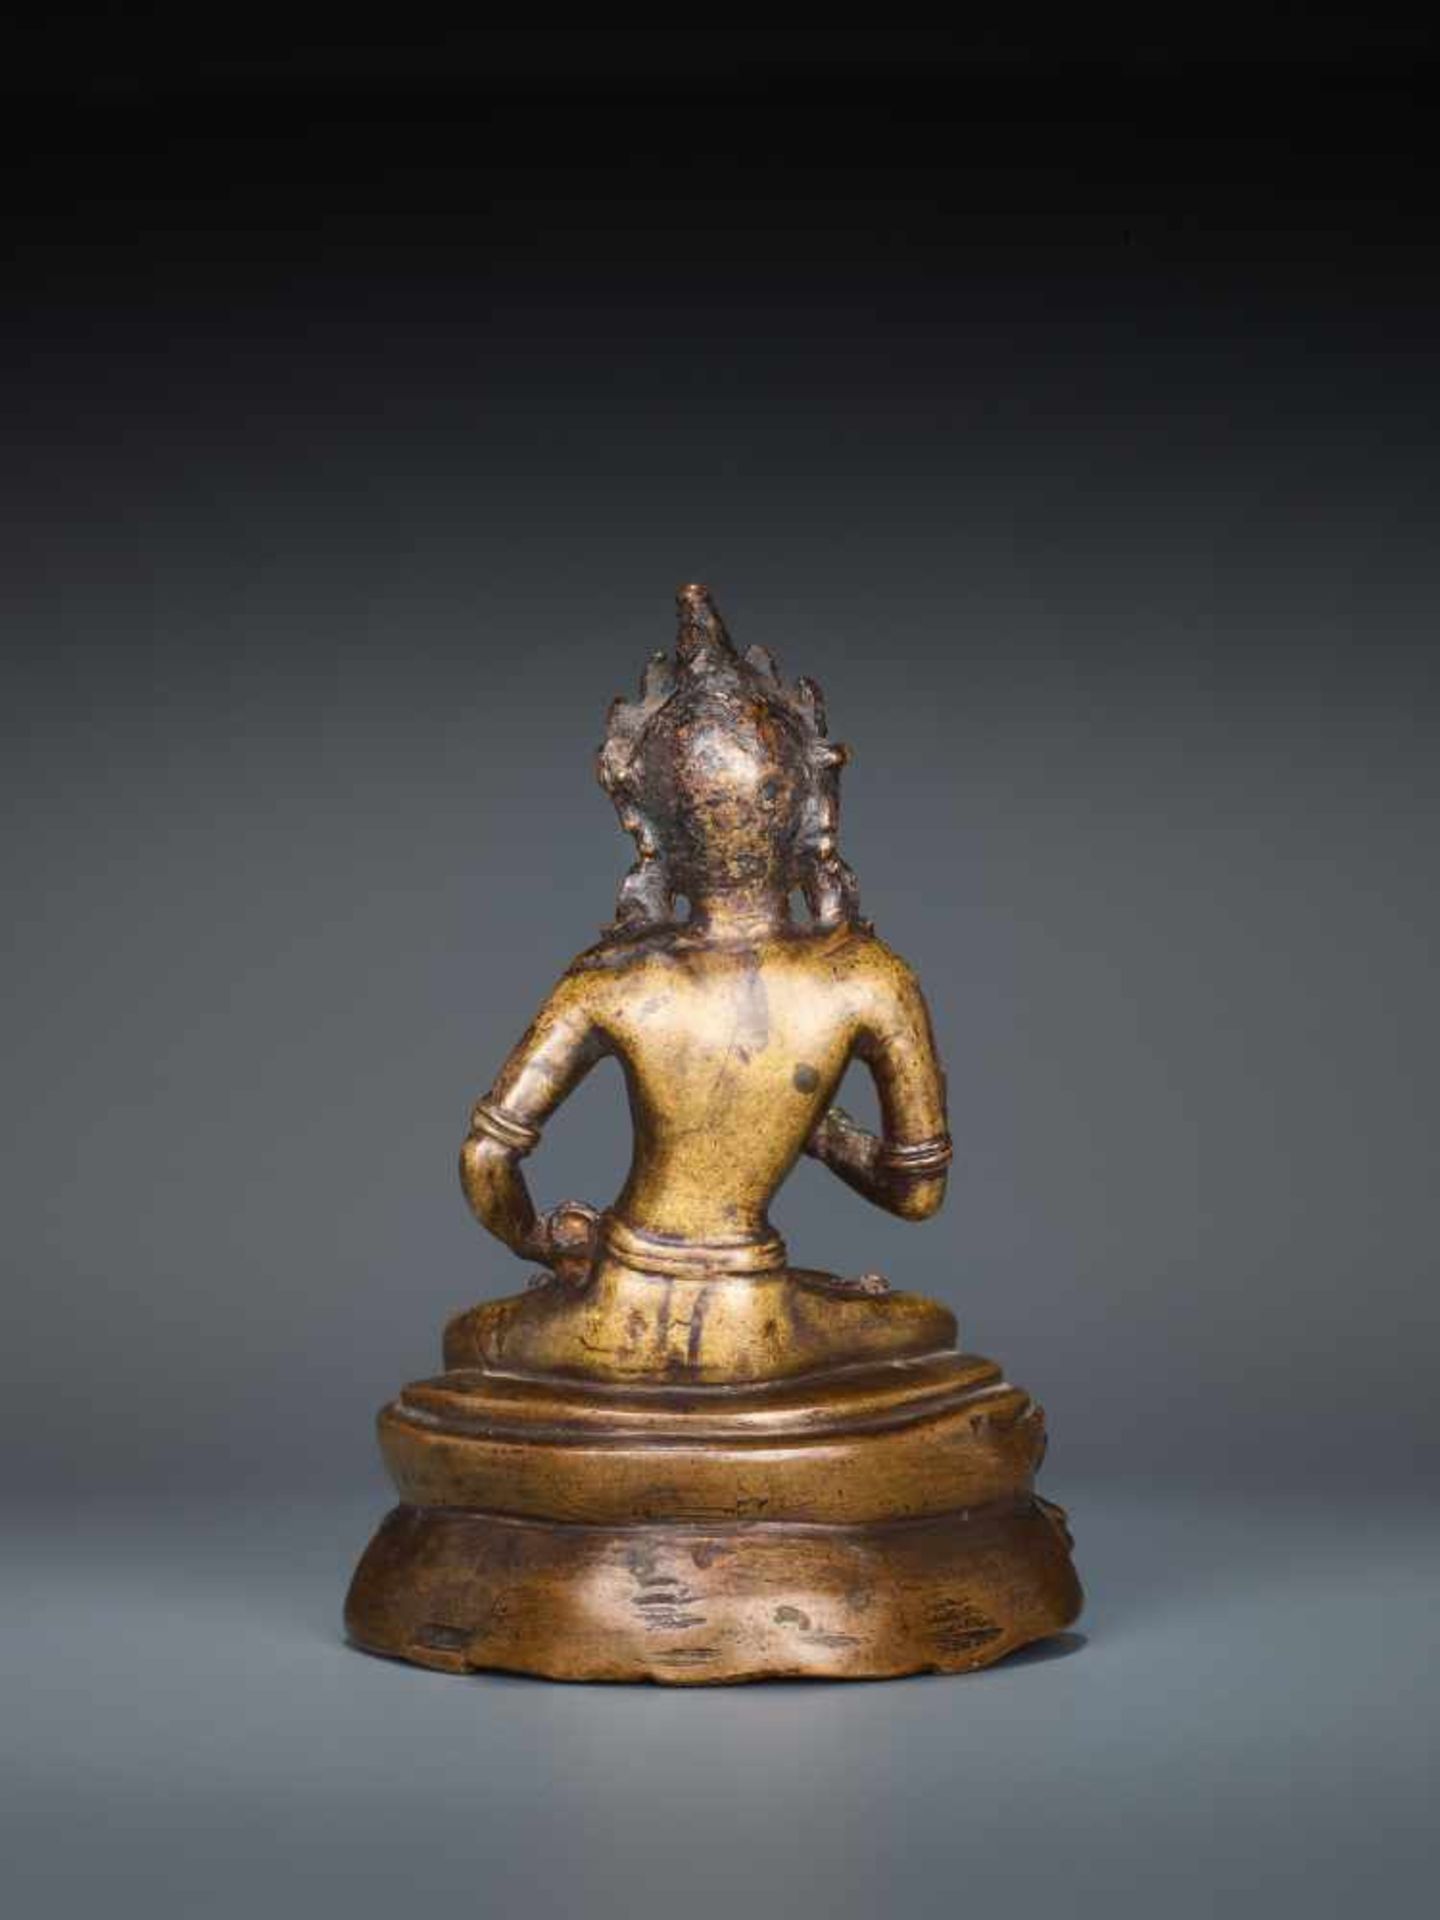 A FINE BRONZE FIGURE OF VAJRASATTVA, TIBET, 16th - 17th CENTURYCast and chased bronze Tibet, - Image 5 of 6